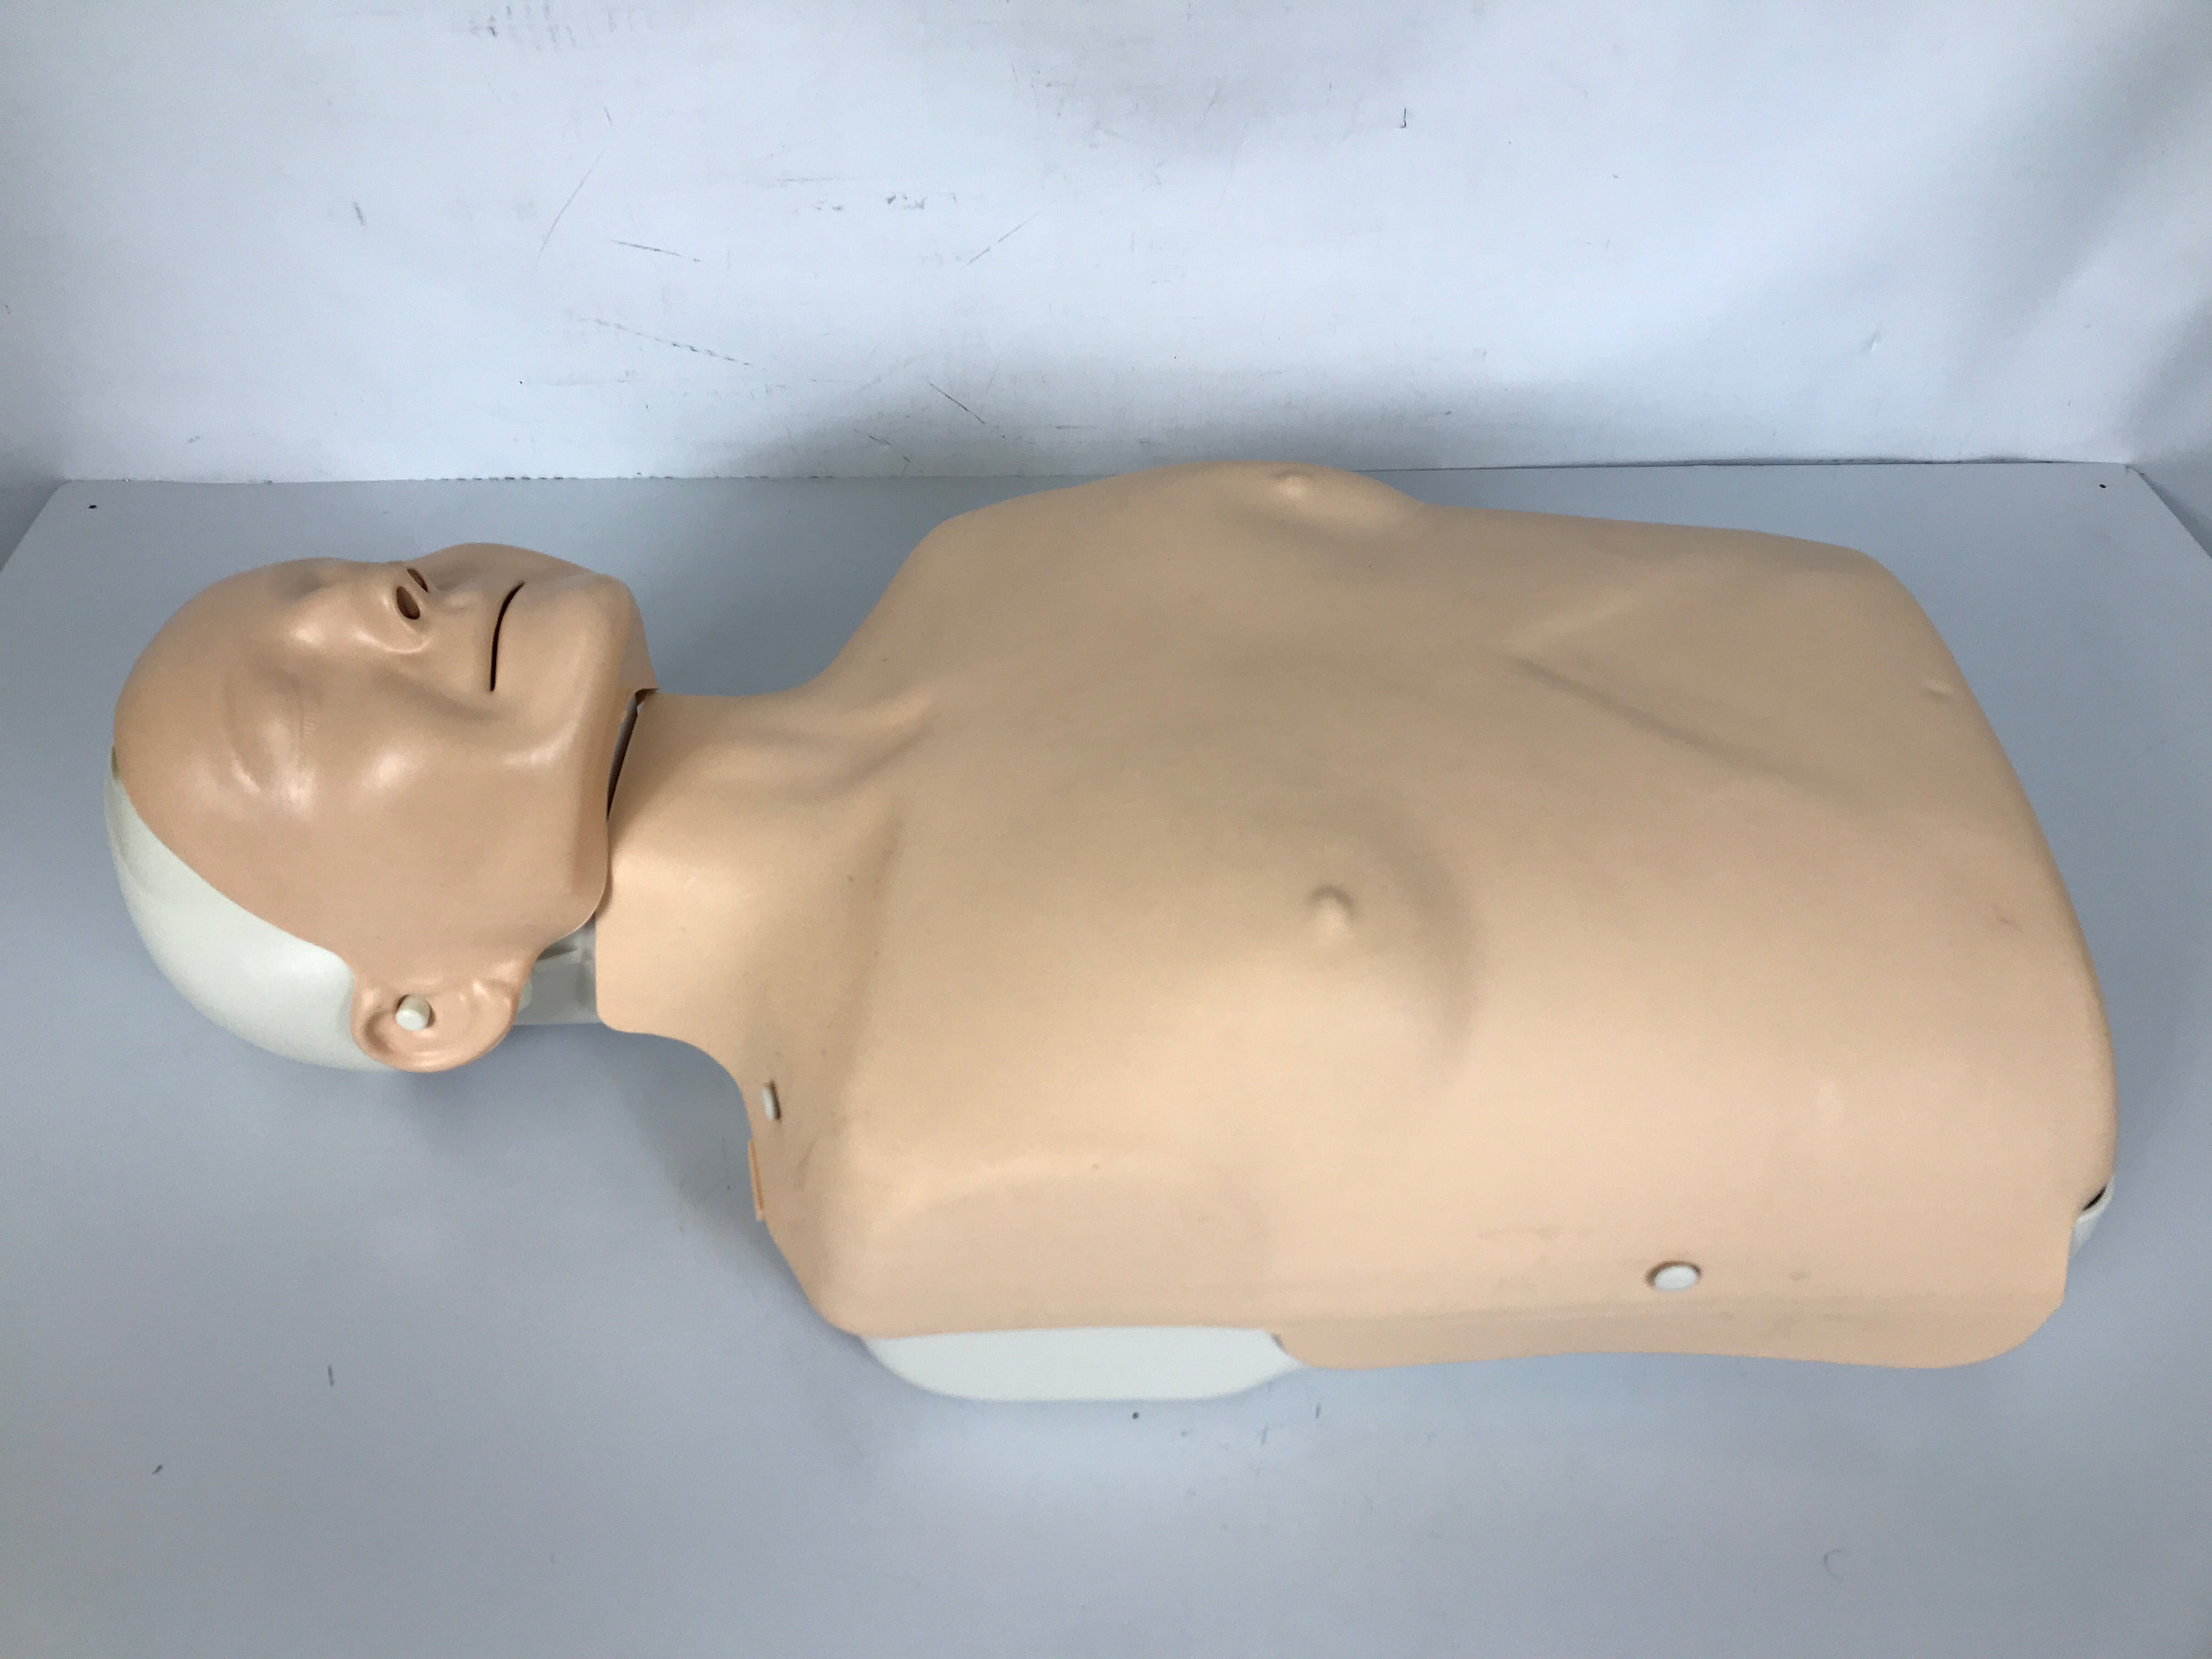 4 Laerdal Little Anne CPR Training Adult Torso Manikins with Bag and Extras